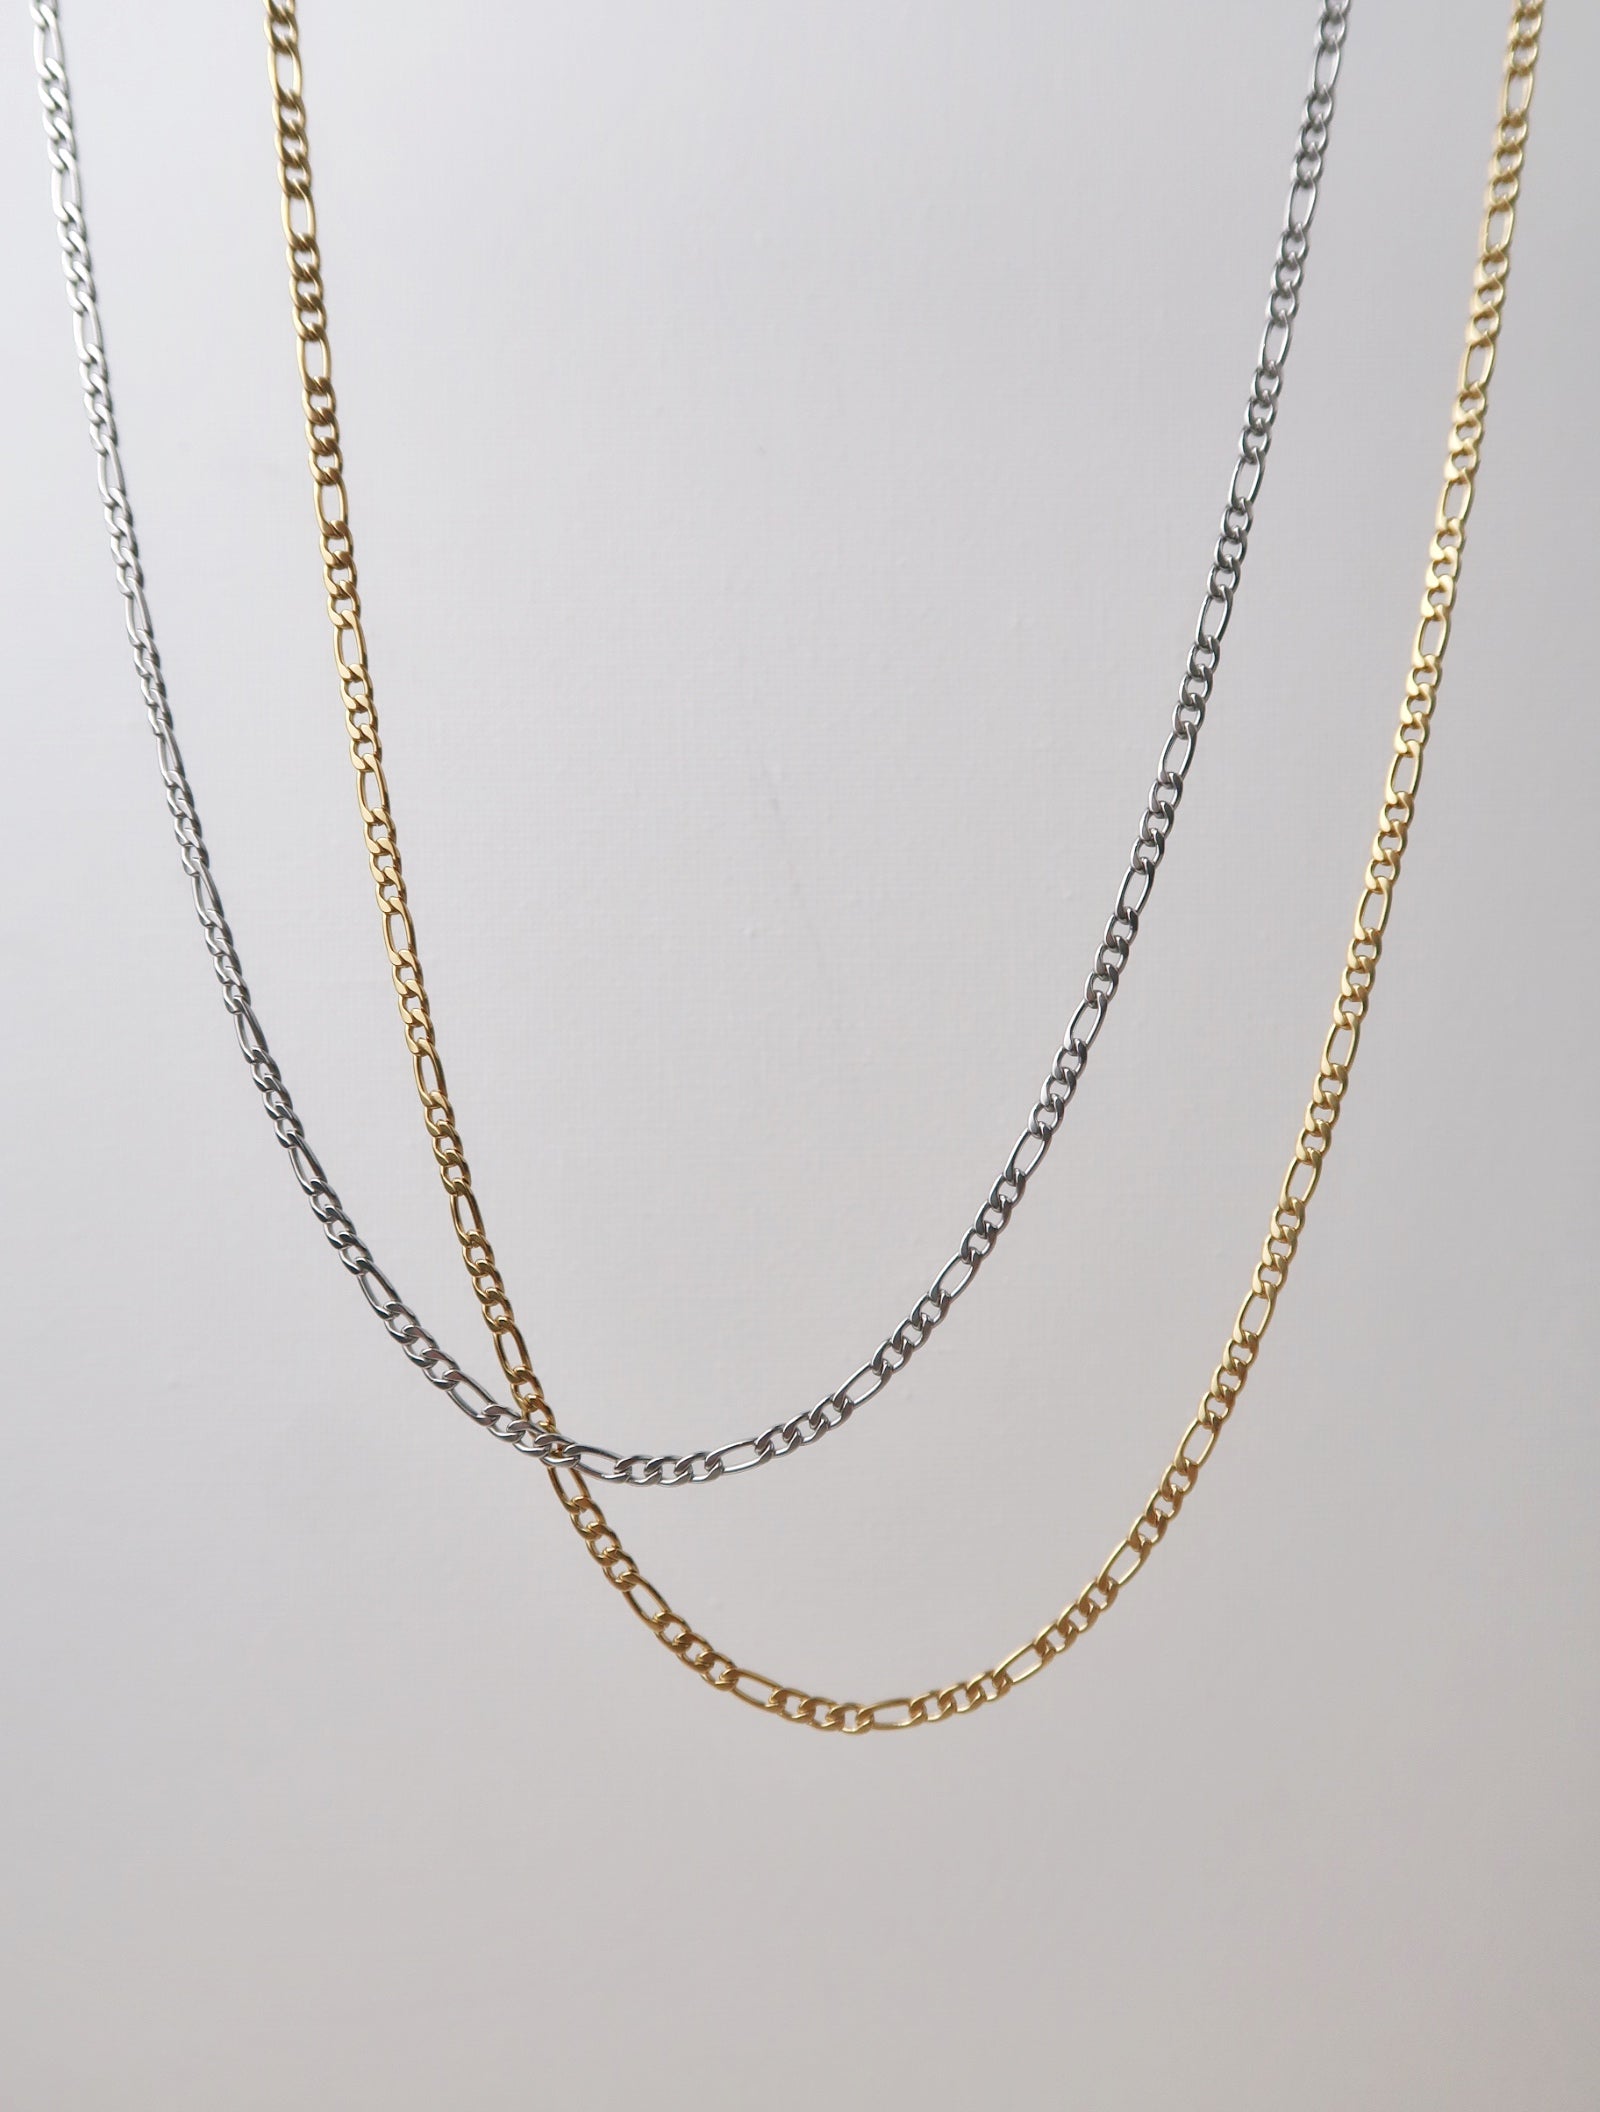 Classic Figaro Chain Necklace (55cm) - Esah and Co